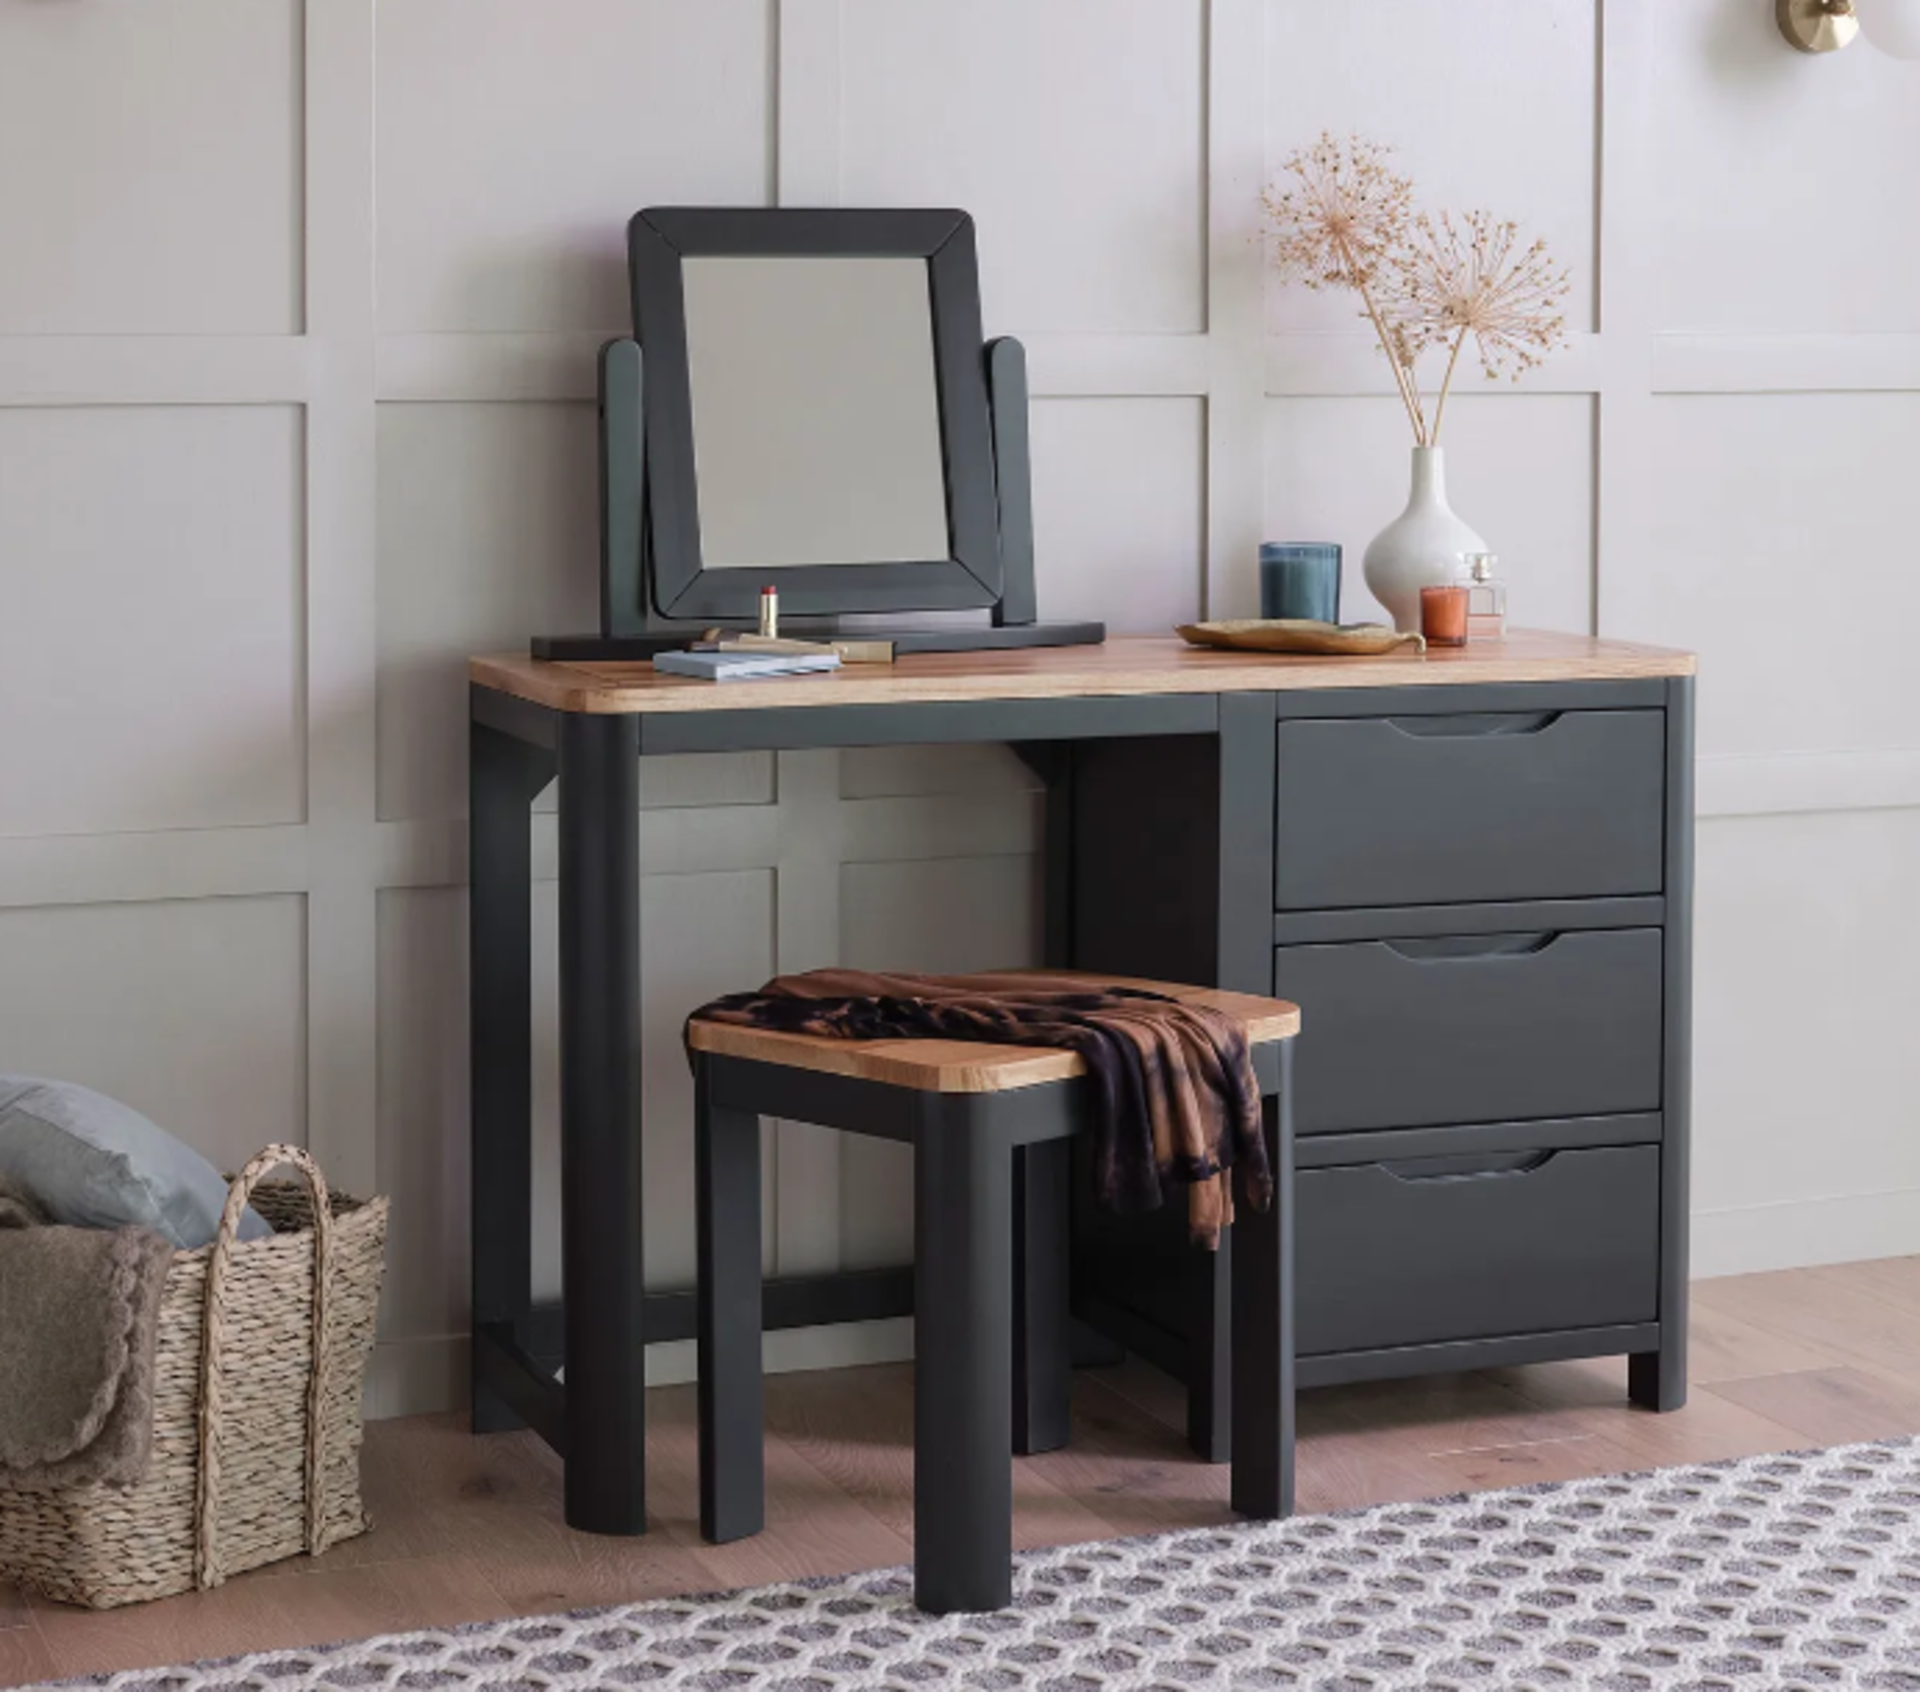 GROVE Natural Oak & Dark Grey Paint Dressing Table. RRP £599.99. A peaceful place to get ready for